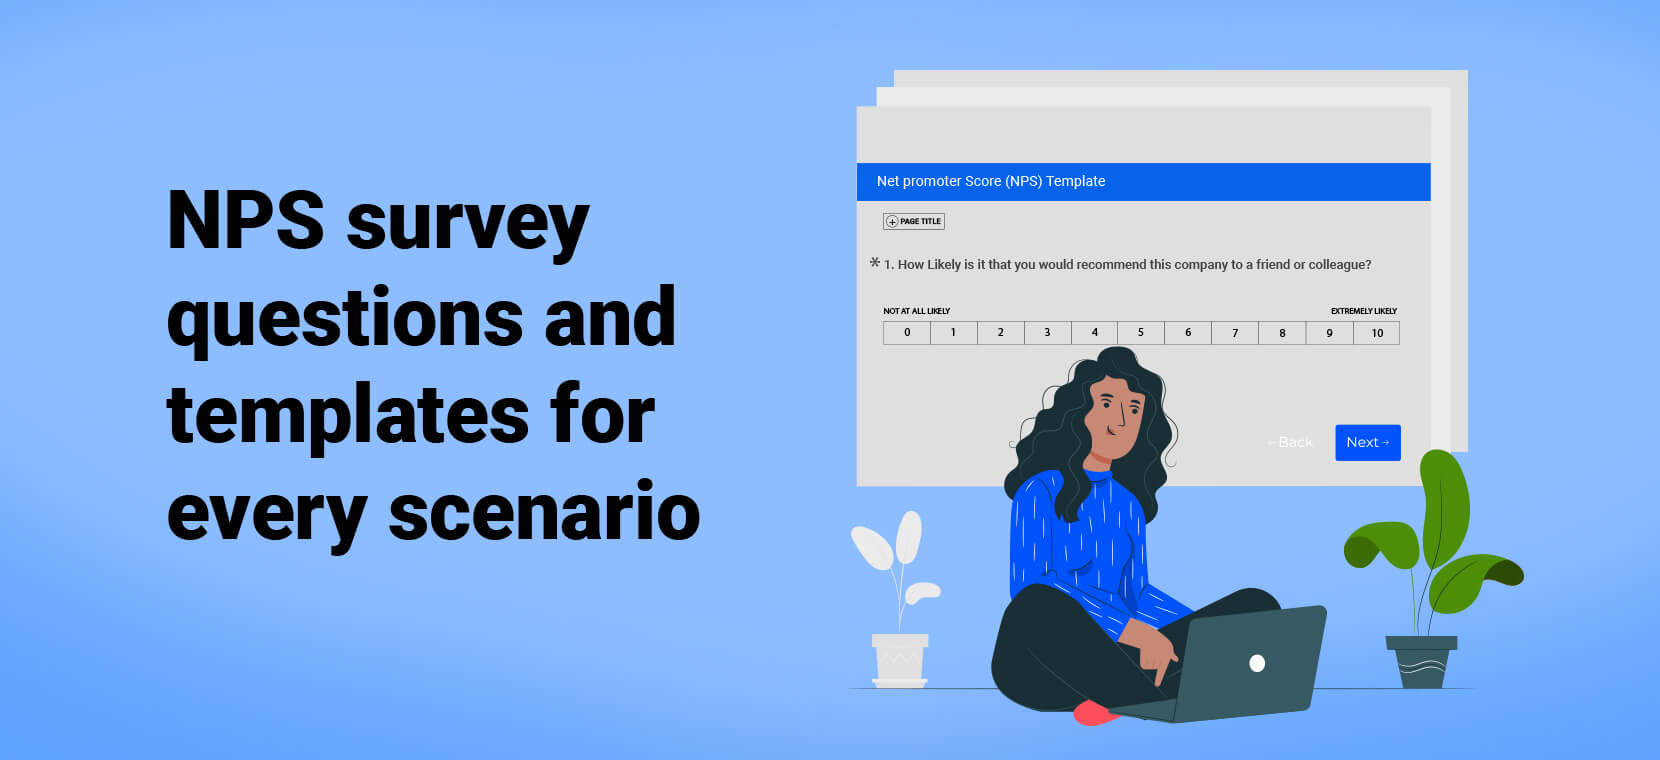 Net Promoter Score survey questions with ready to use templates